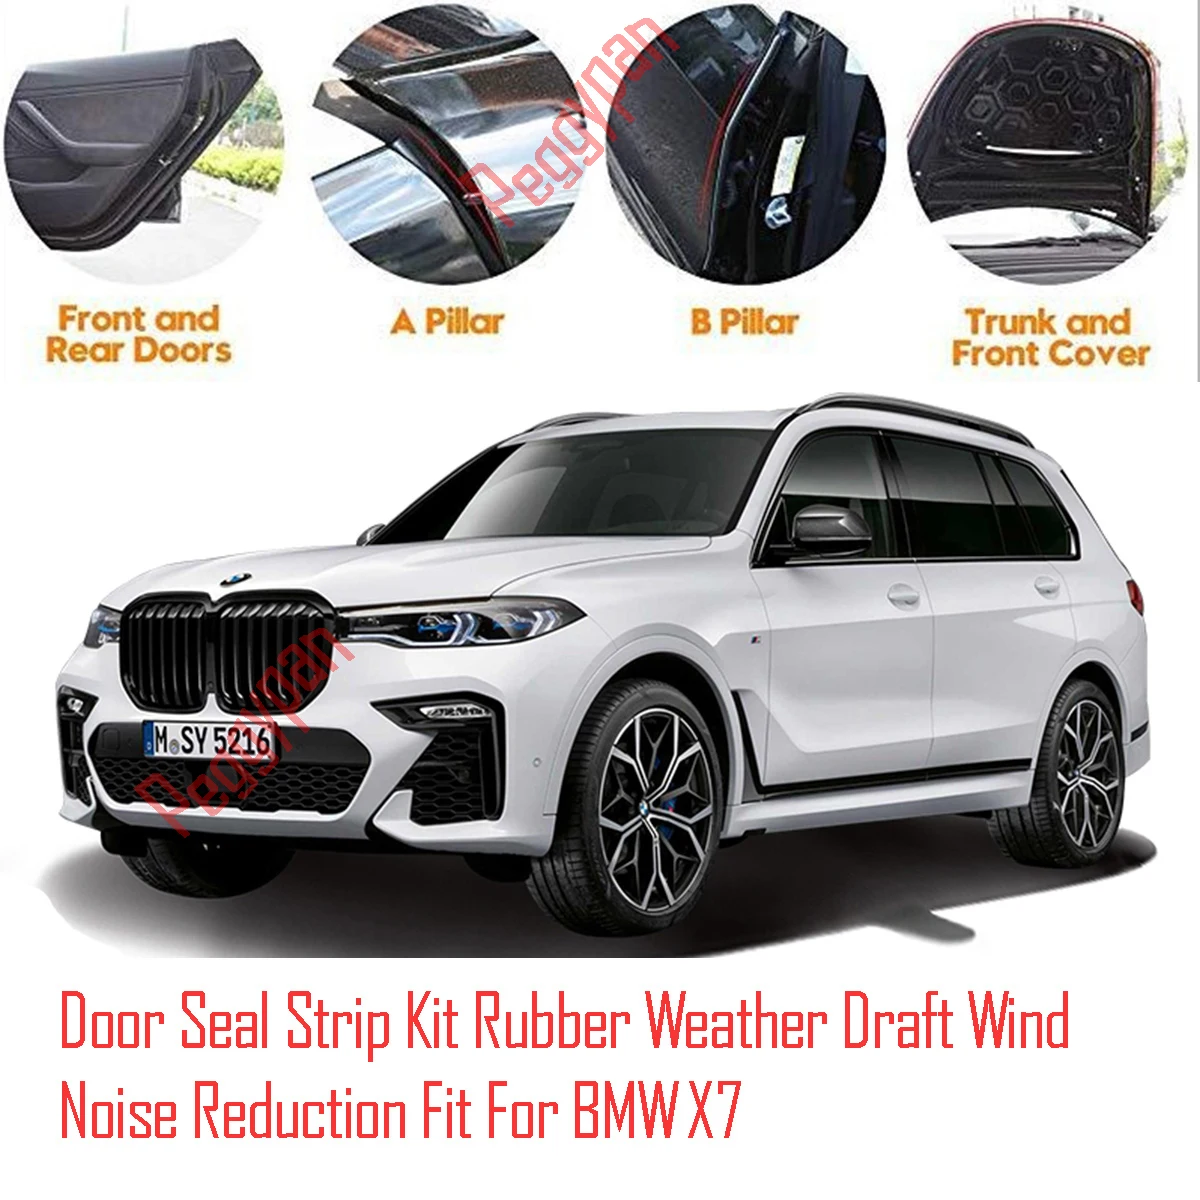 Door Seal Strip Kit Self Adhesive Window Engine Cover Soundproof Rubber Weather Draft Wind Noise Reduction Fit For BMW X7